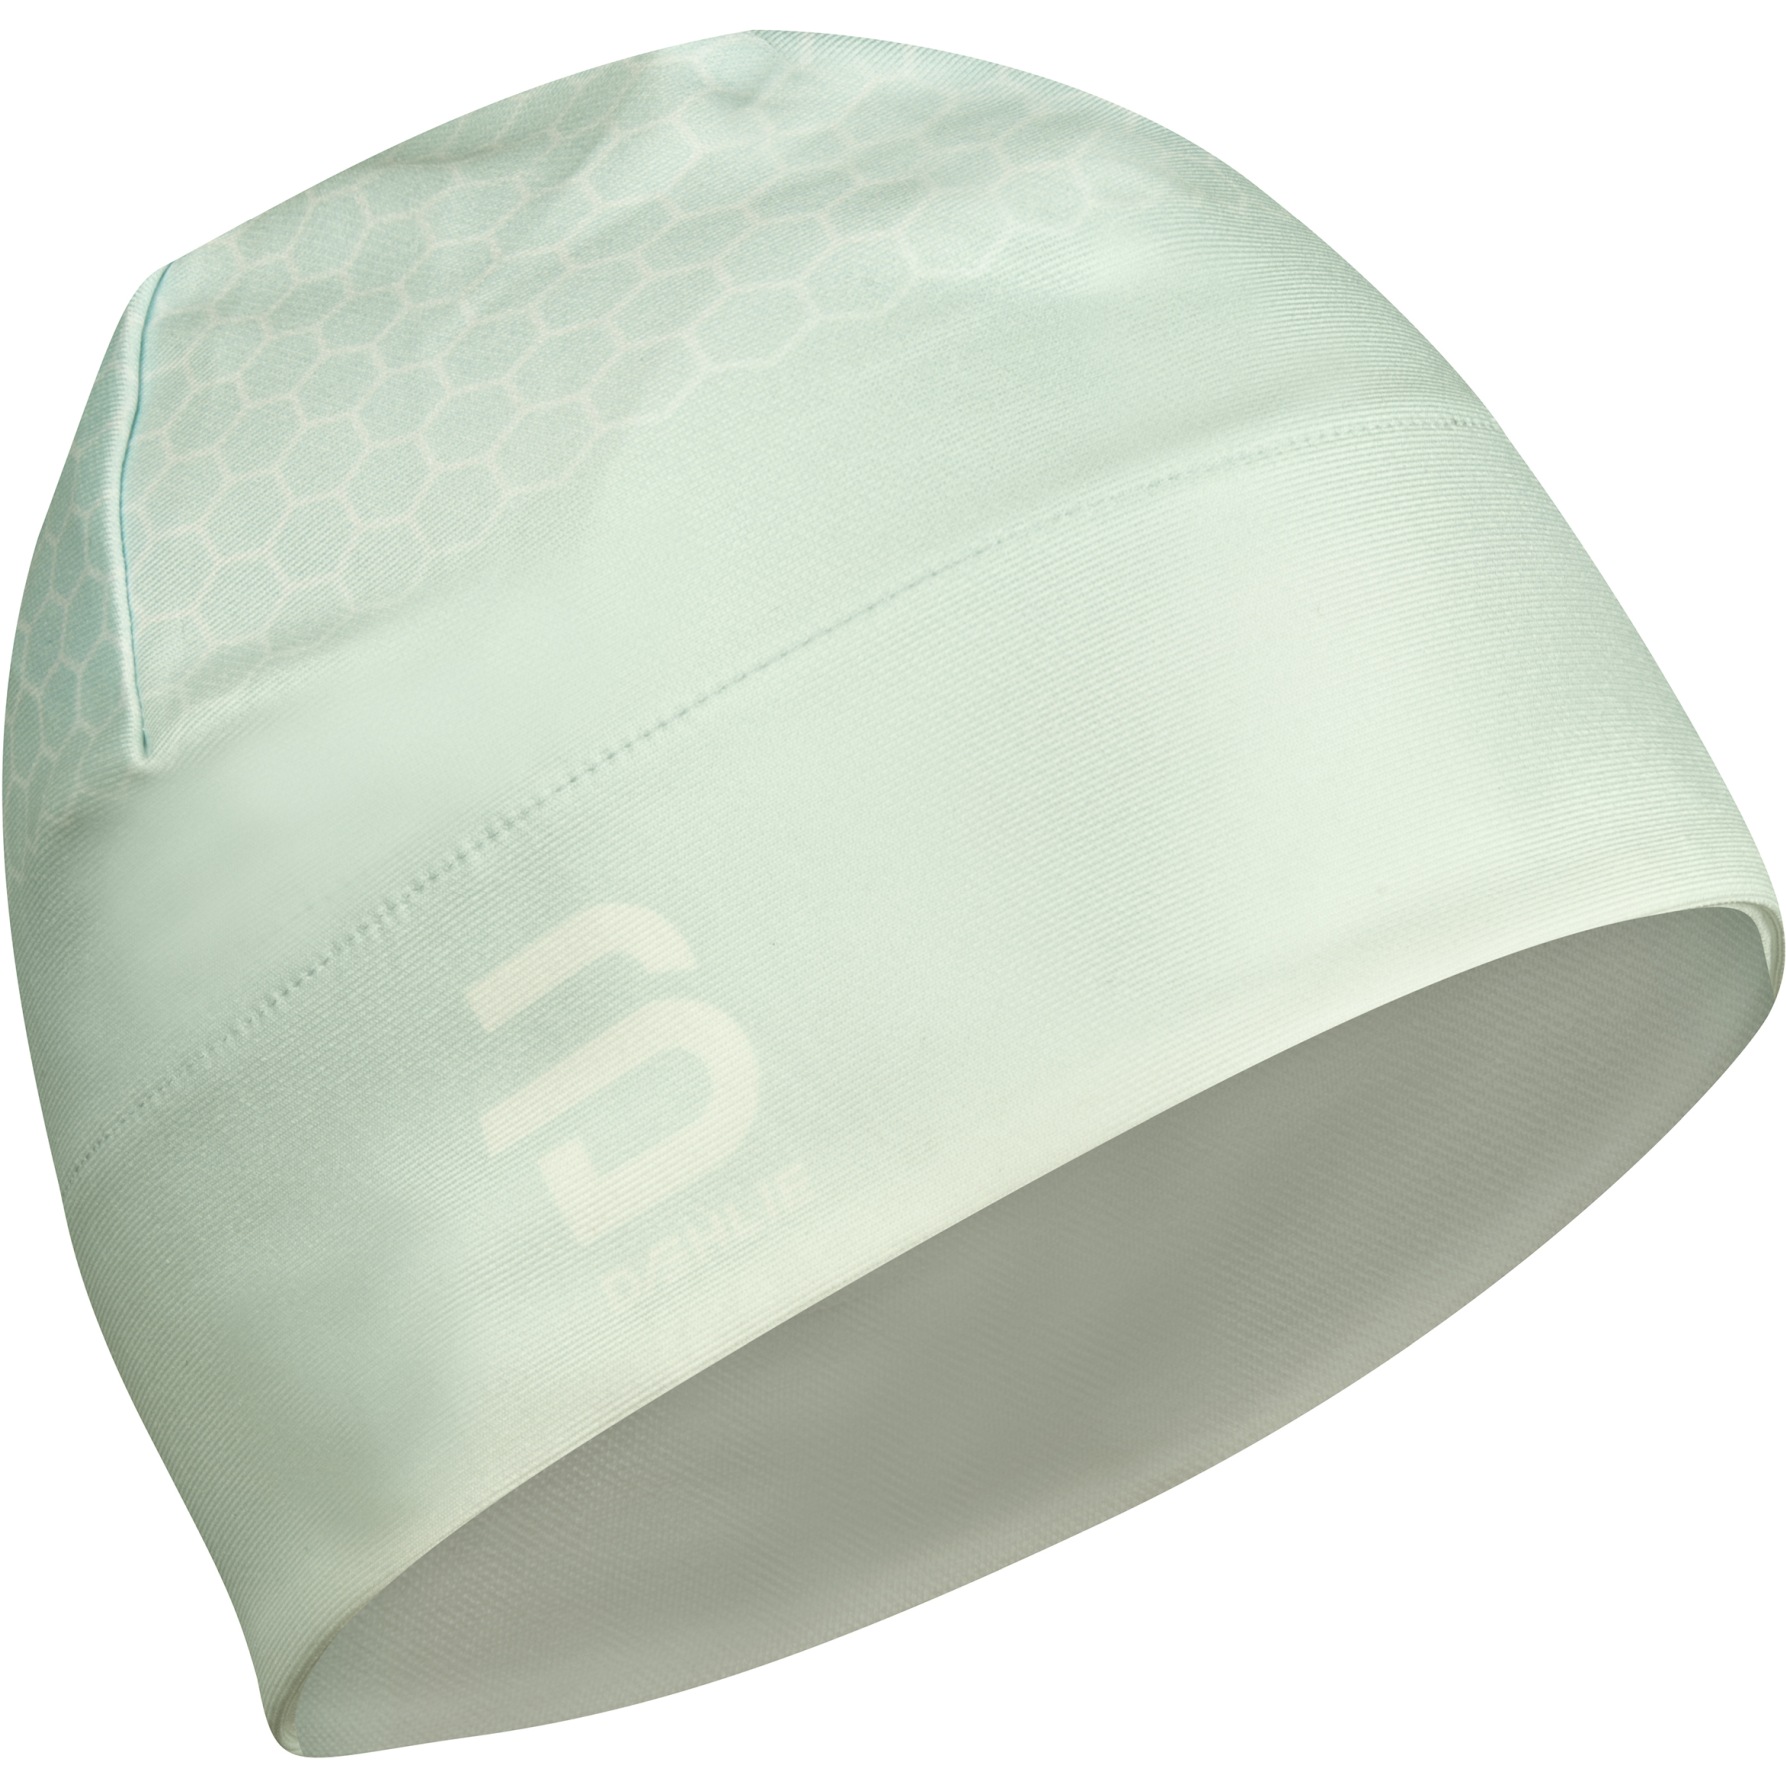 Picture of Daehlie Polyknit Print Hat 333453 - Iced Aqua